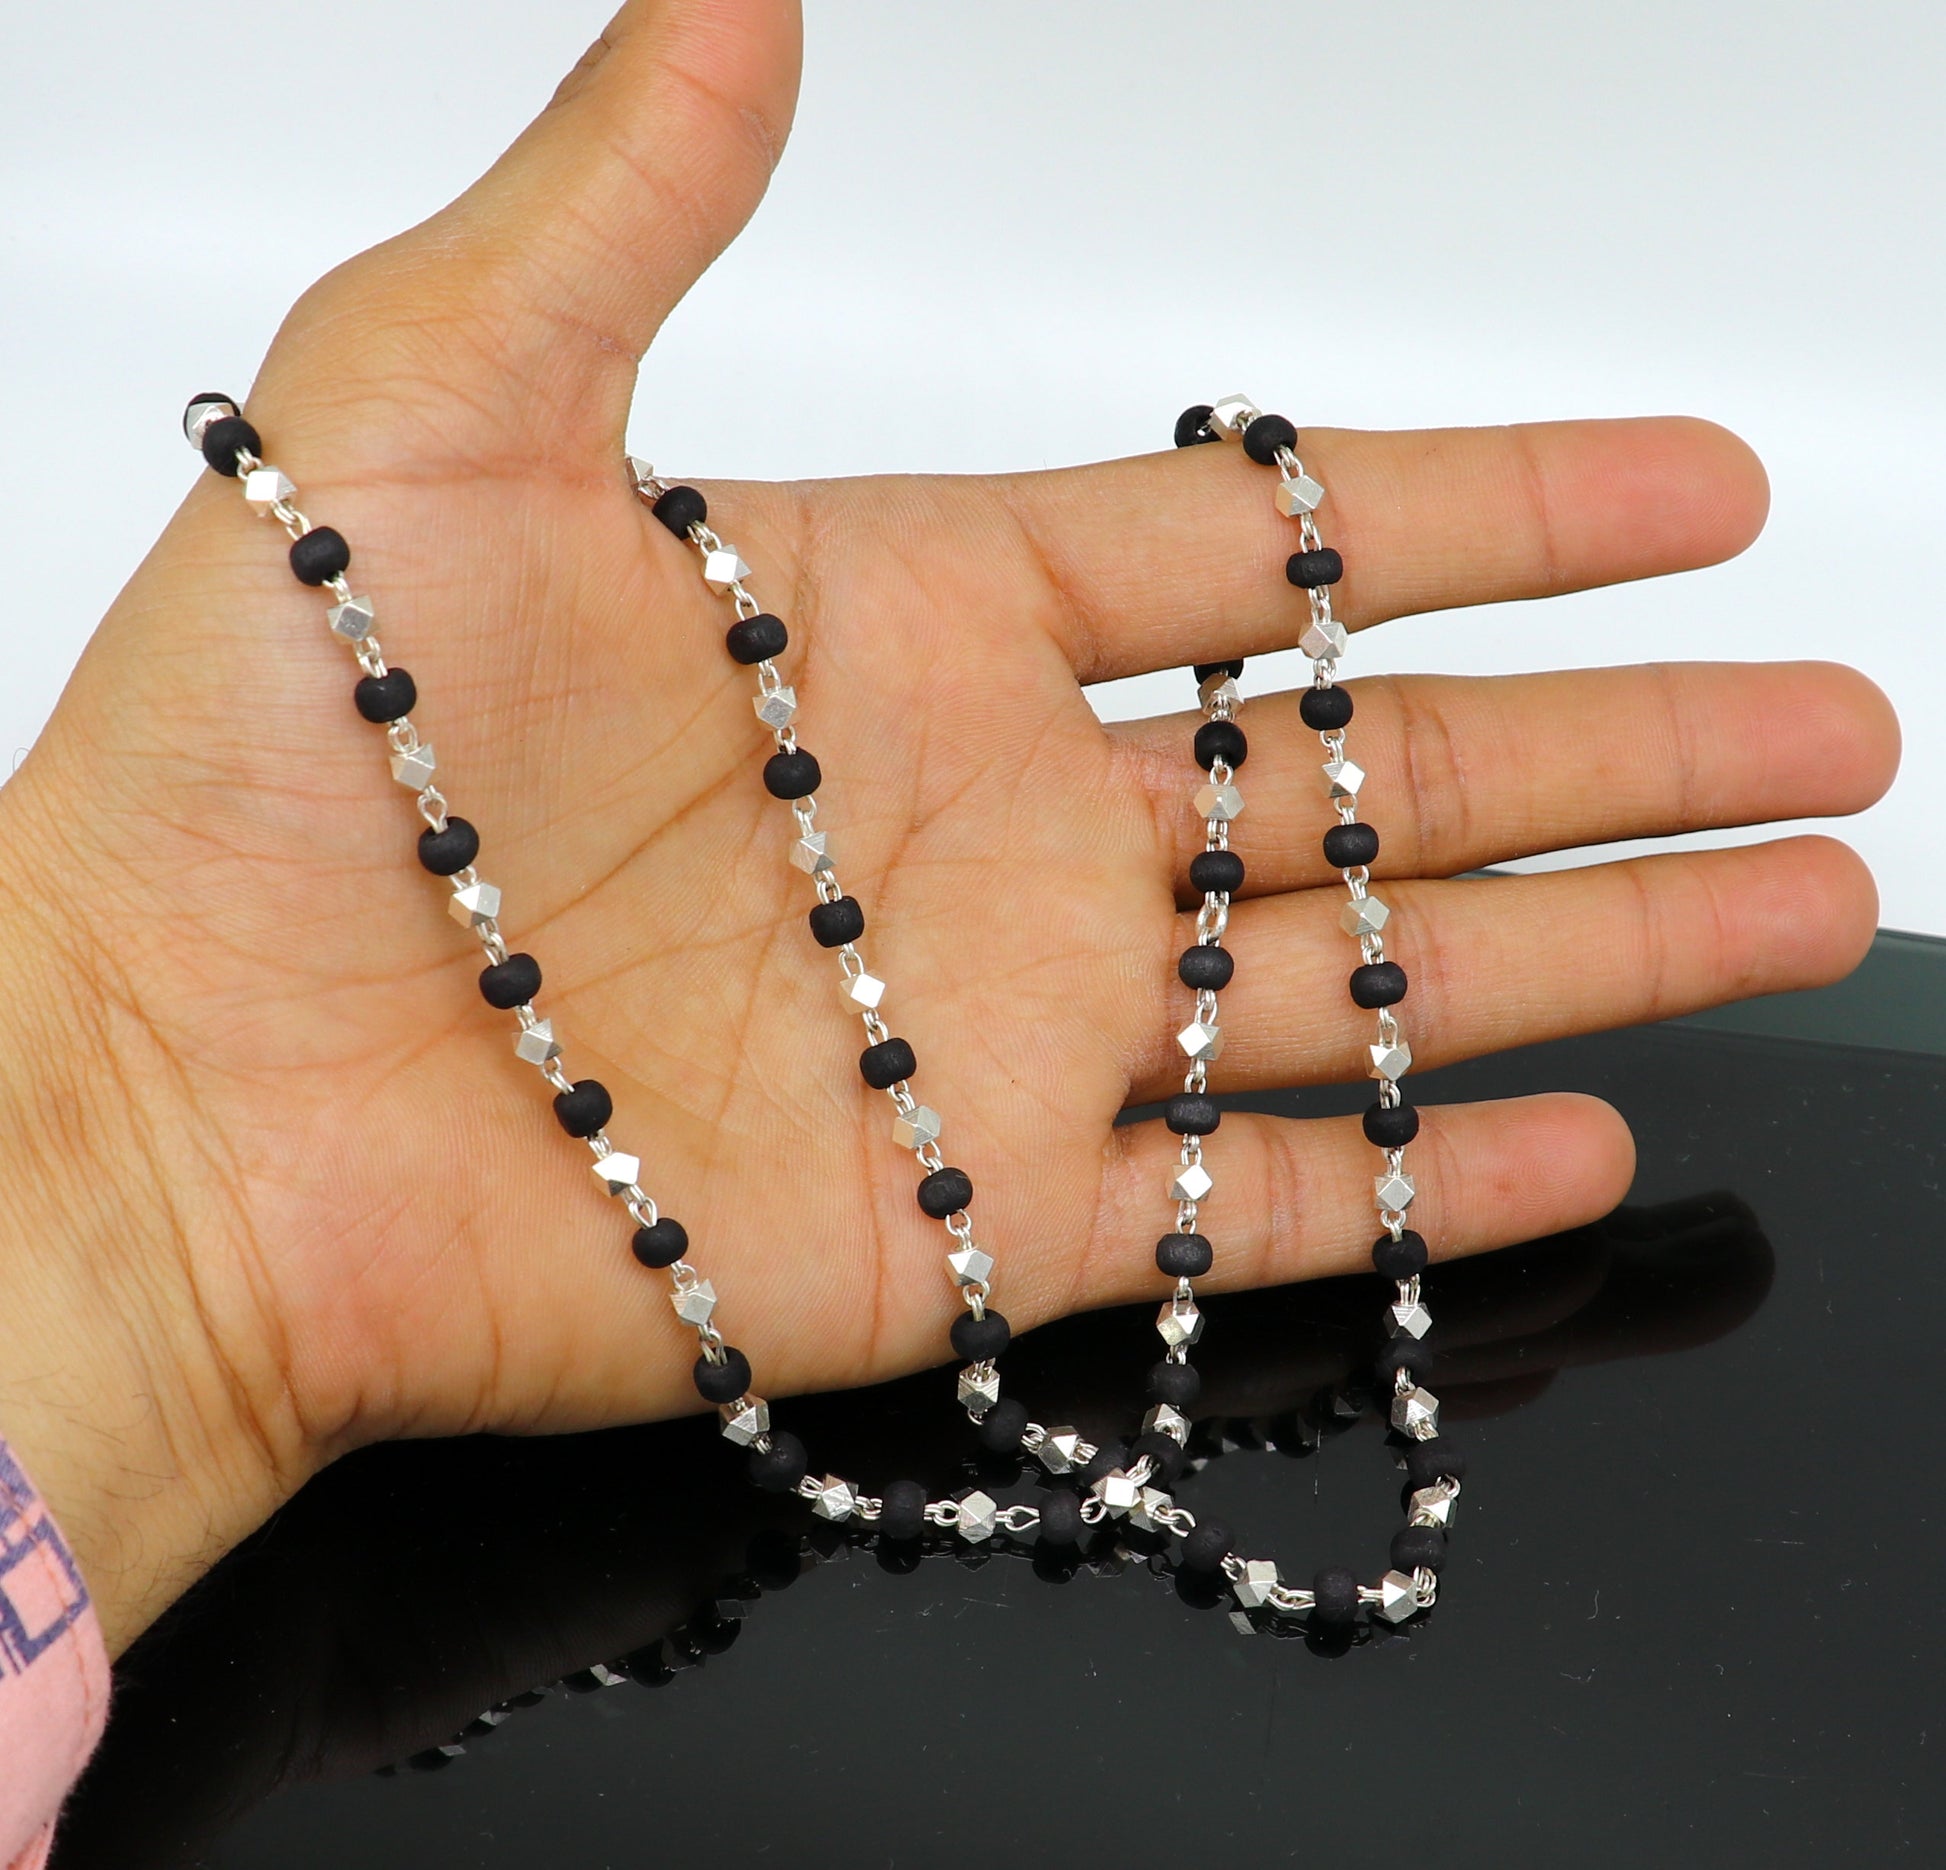 925 Silver handcrafted Black Basil rosary beads with silver beads necklace chain tulsi mala use in Ayurveda feel protected and focused ch102 - TRIBAL ORNAMENTS